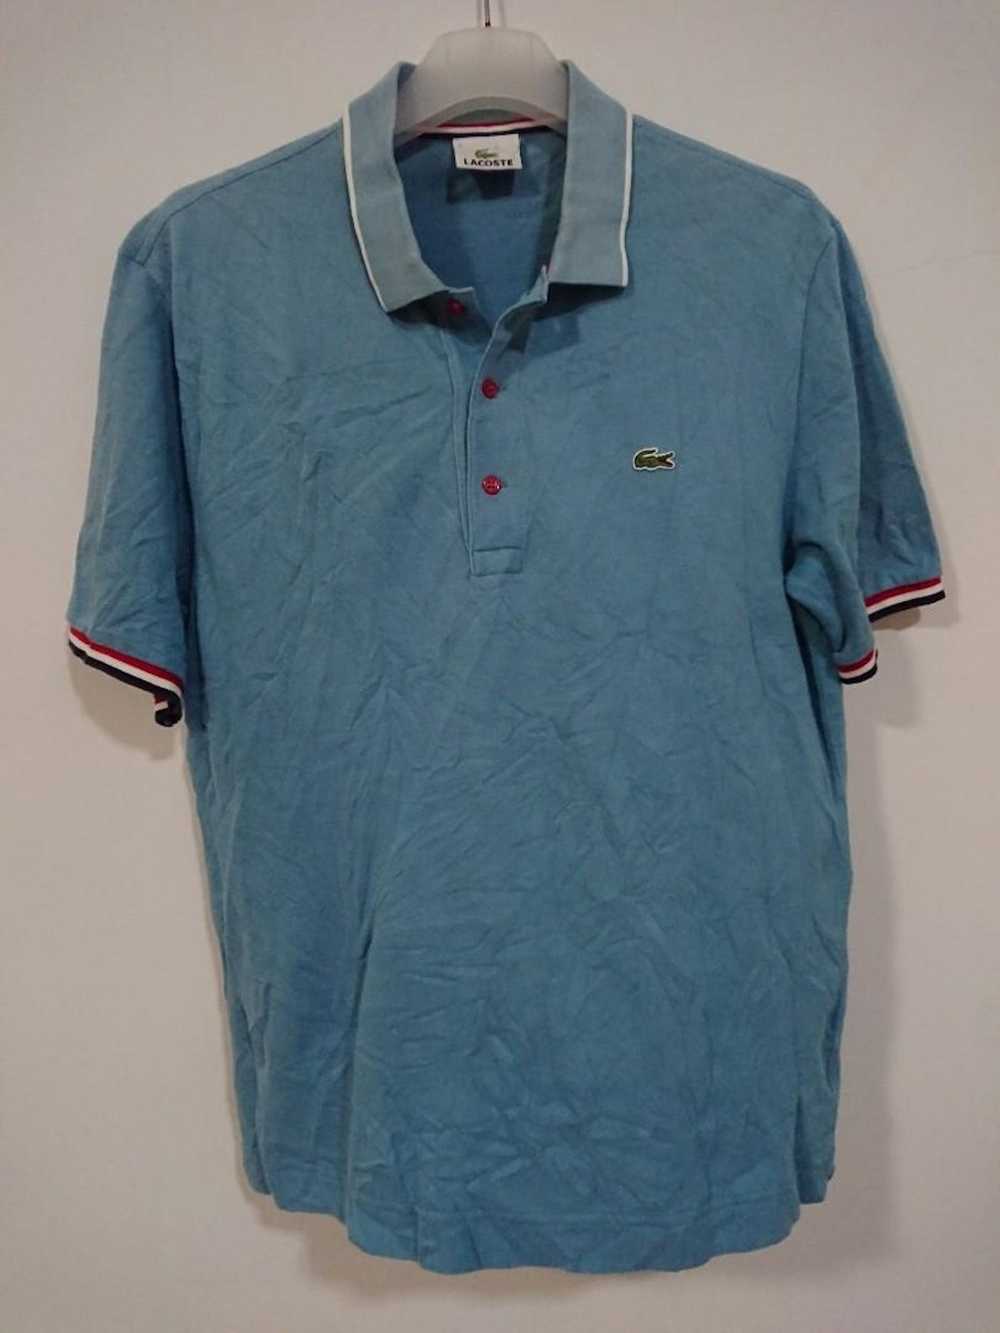 Lacoste Lacoste polos shirt size 4 - image 1